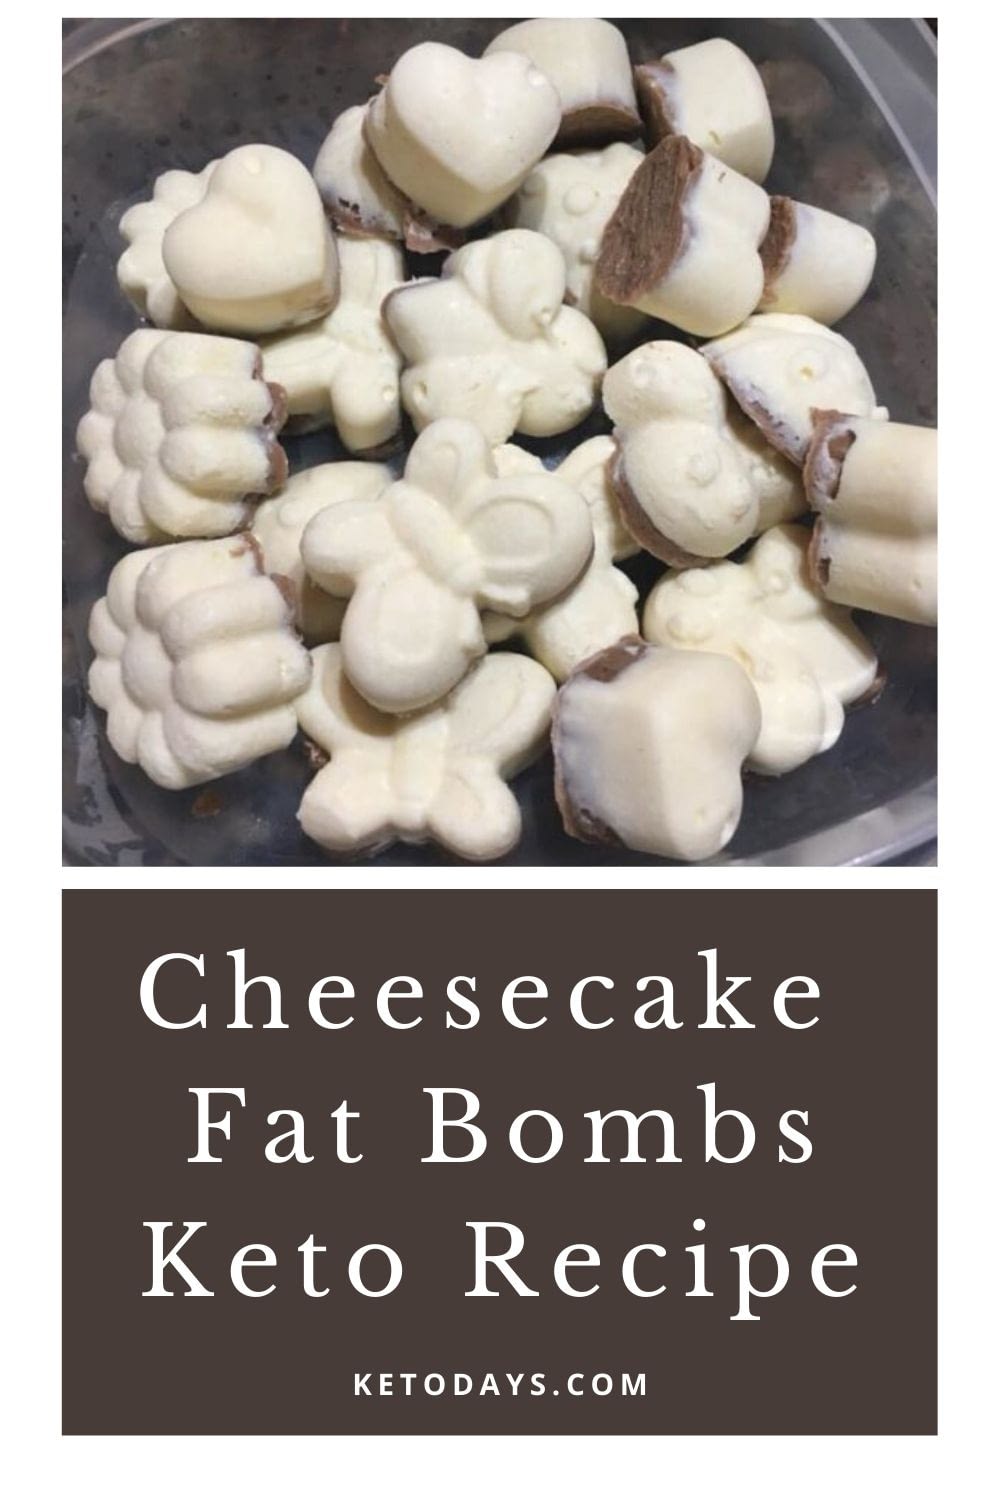 The perfect treat. These delicious fat bombs are filling, high in fat content, and low in carbs and protein. The perfect addition to any day.